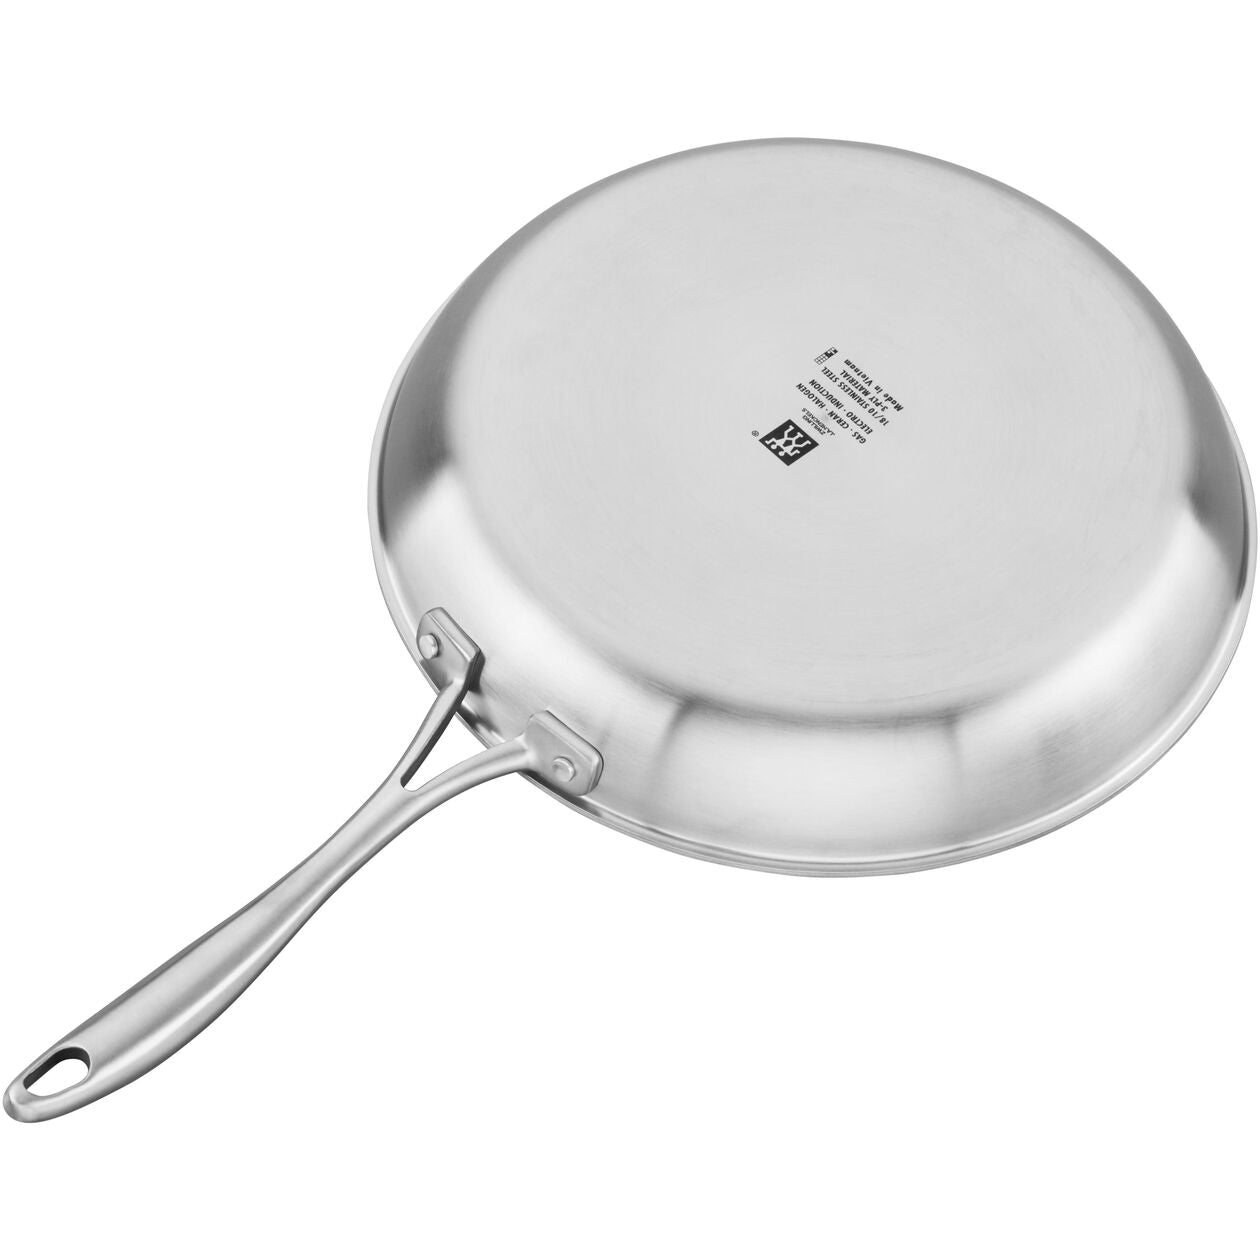 3 Ply, 12-inch, 18/10 Stainless Steel, Ceramic, Frying pan